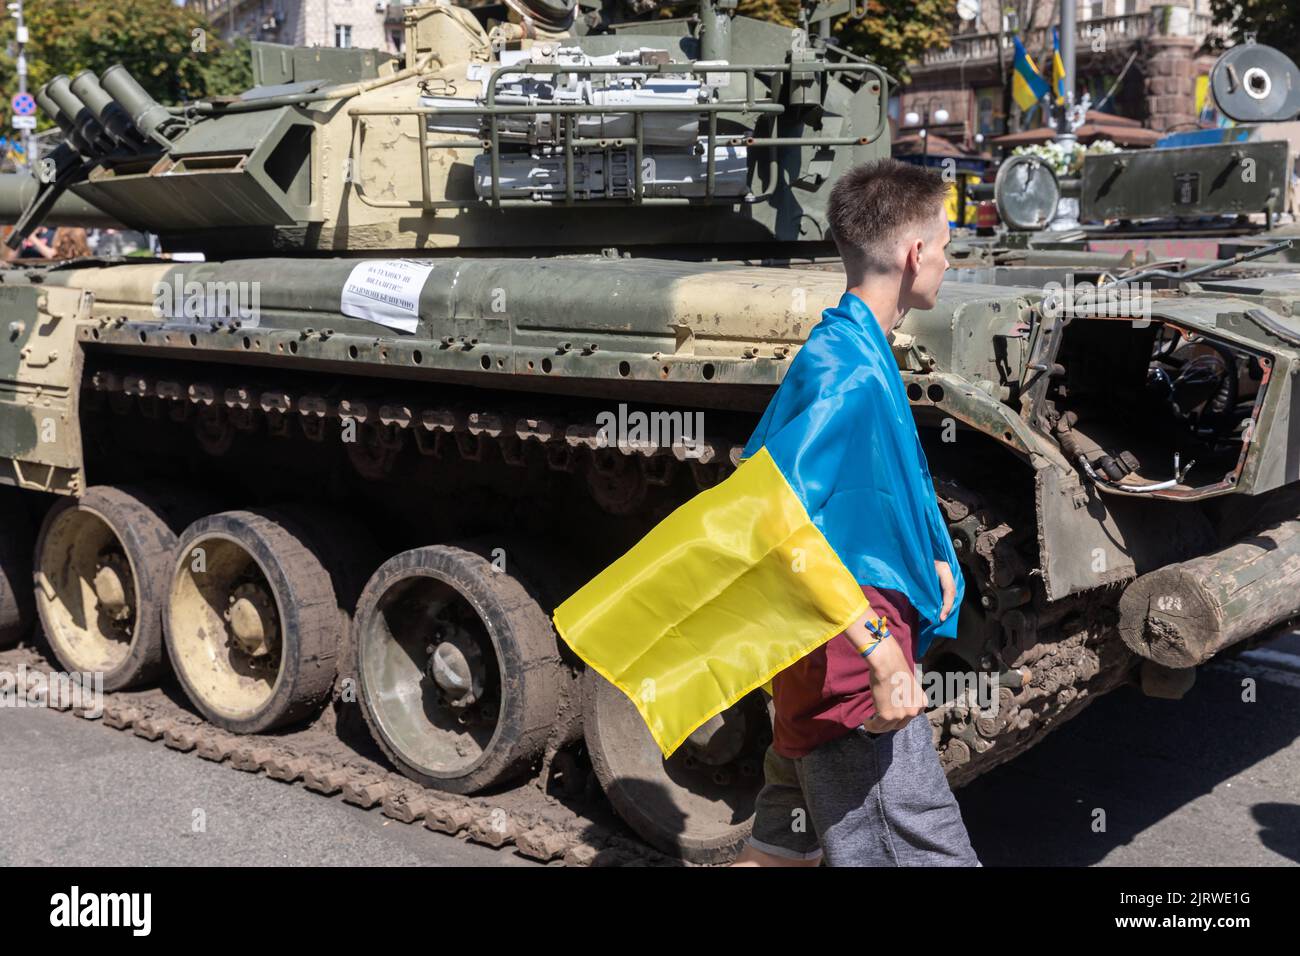 A man wrapped with a Ukrainian flag looks at a destroyed Russian tank. An exhibition of destroyed Russian equipment is being organized at Khreshchatyk. Six months ago, Russian military troops were deployed by Russian president Vladimir Putin to invade Ukraine. He reportedly reckoned that they would capture Kyiv in three days, Stock Photo